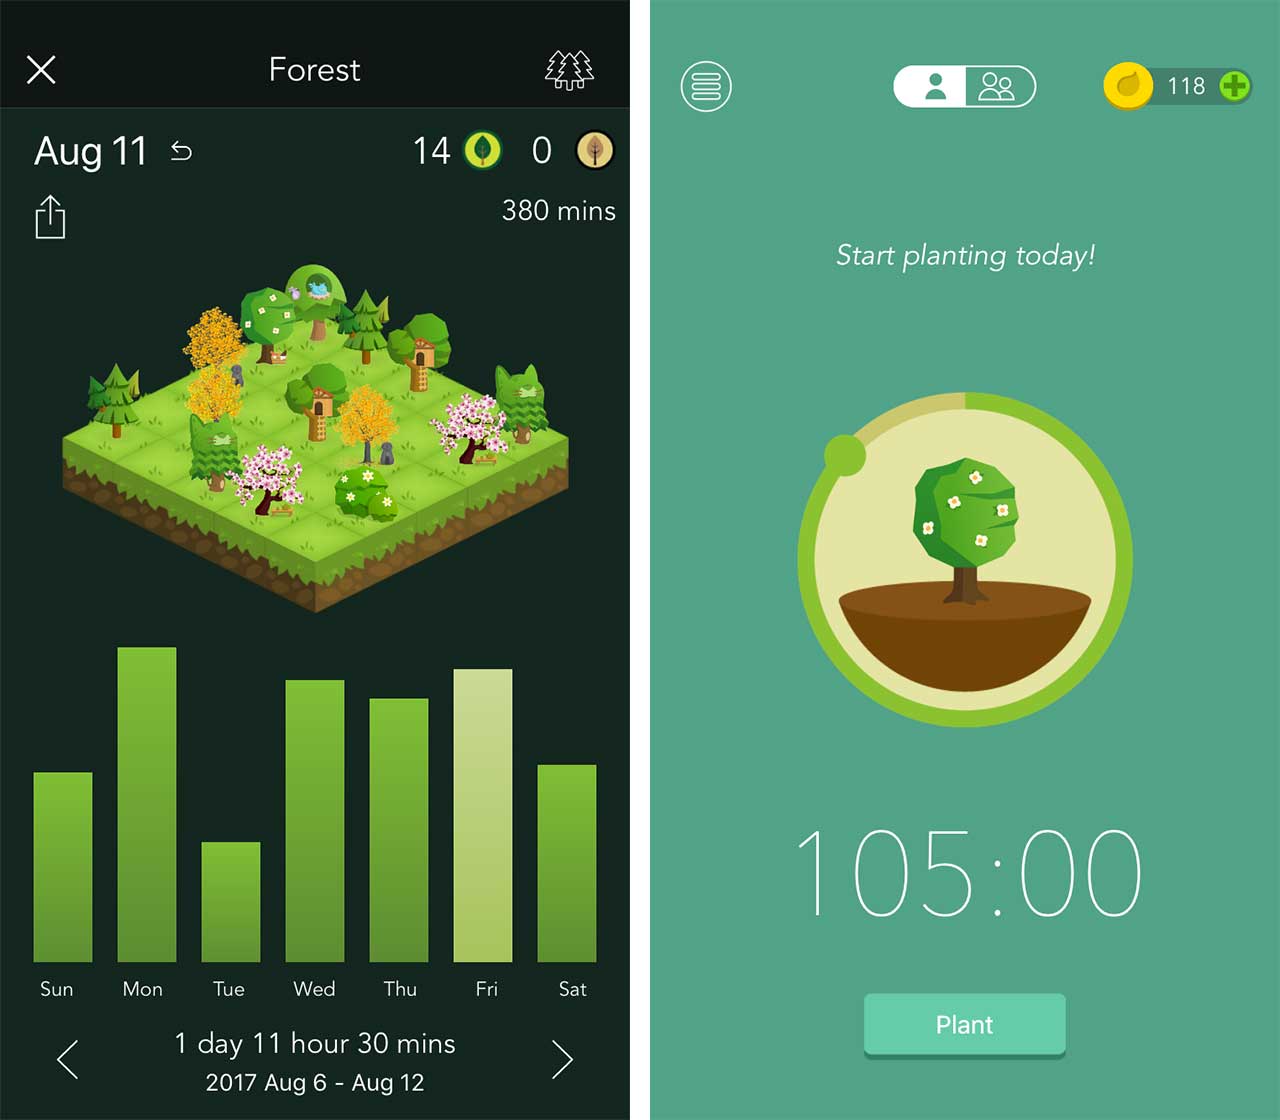 Forest' aims to help you focus